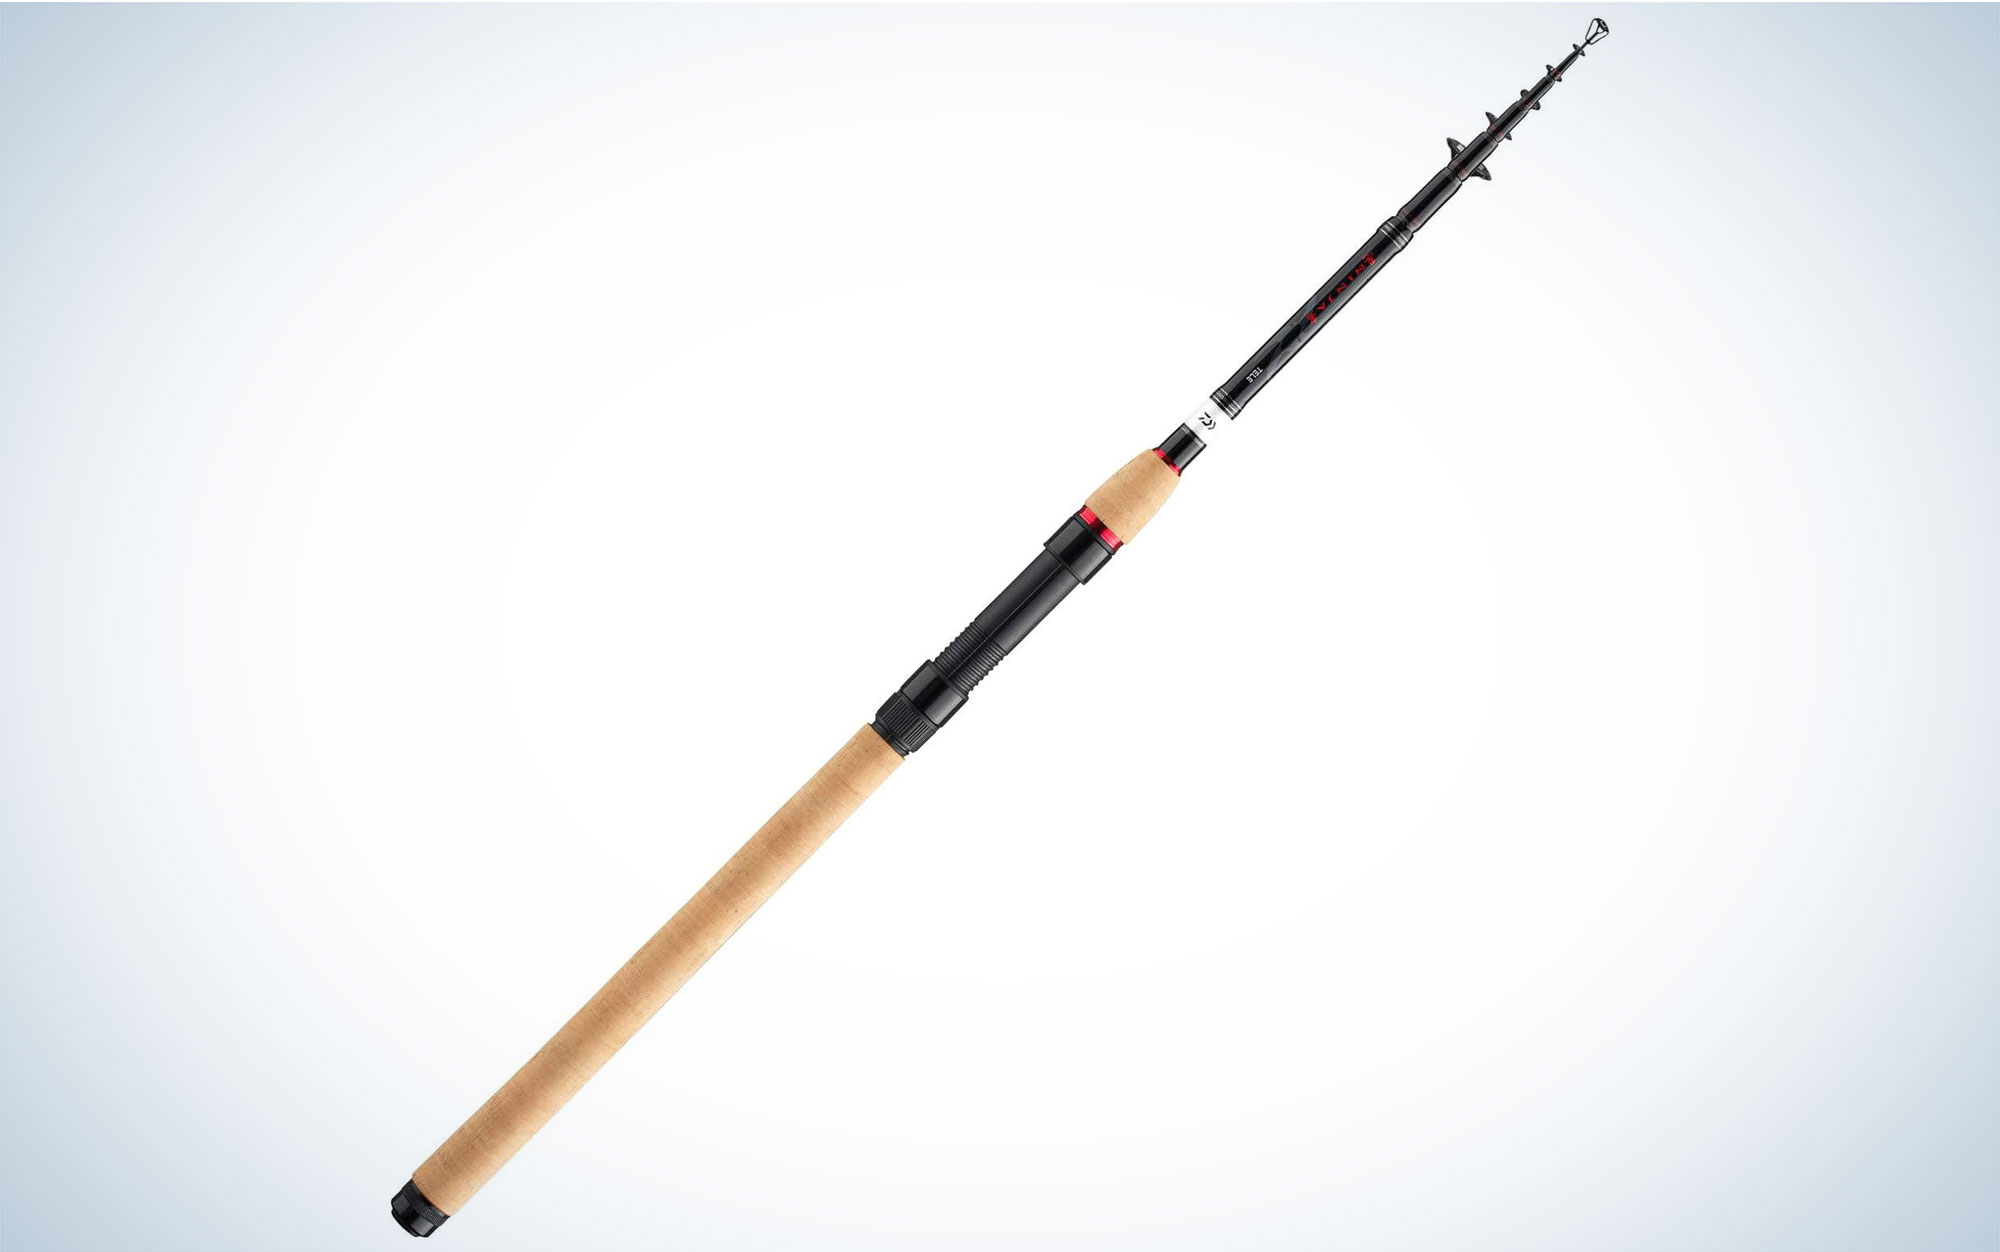 Youth Fishing Pole, Ultra Small Portable Telescopic Fishing Rod and Reel  Combos for River, Lake, Reservoir, Ice Fishing and So On